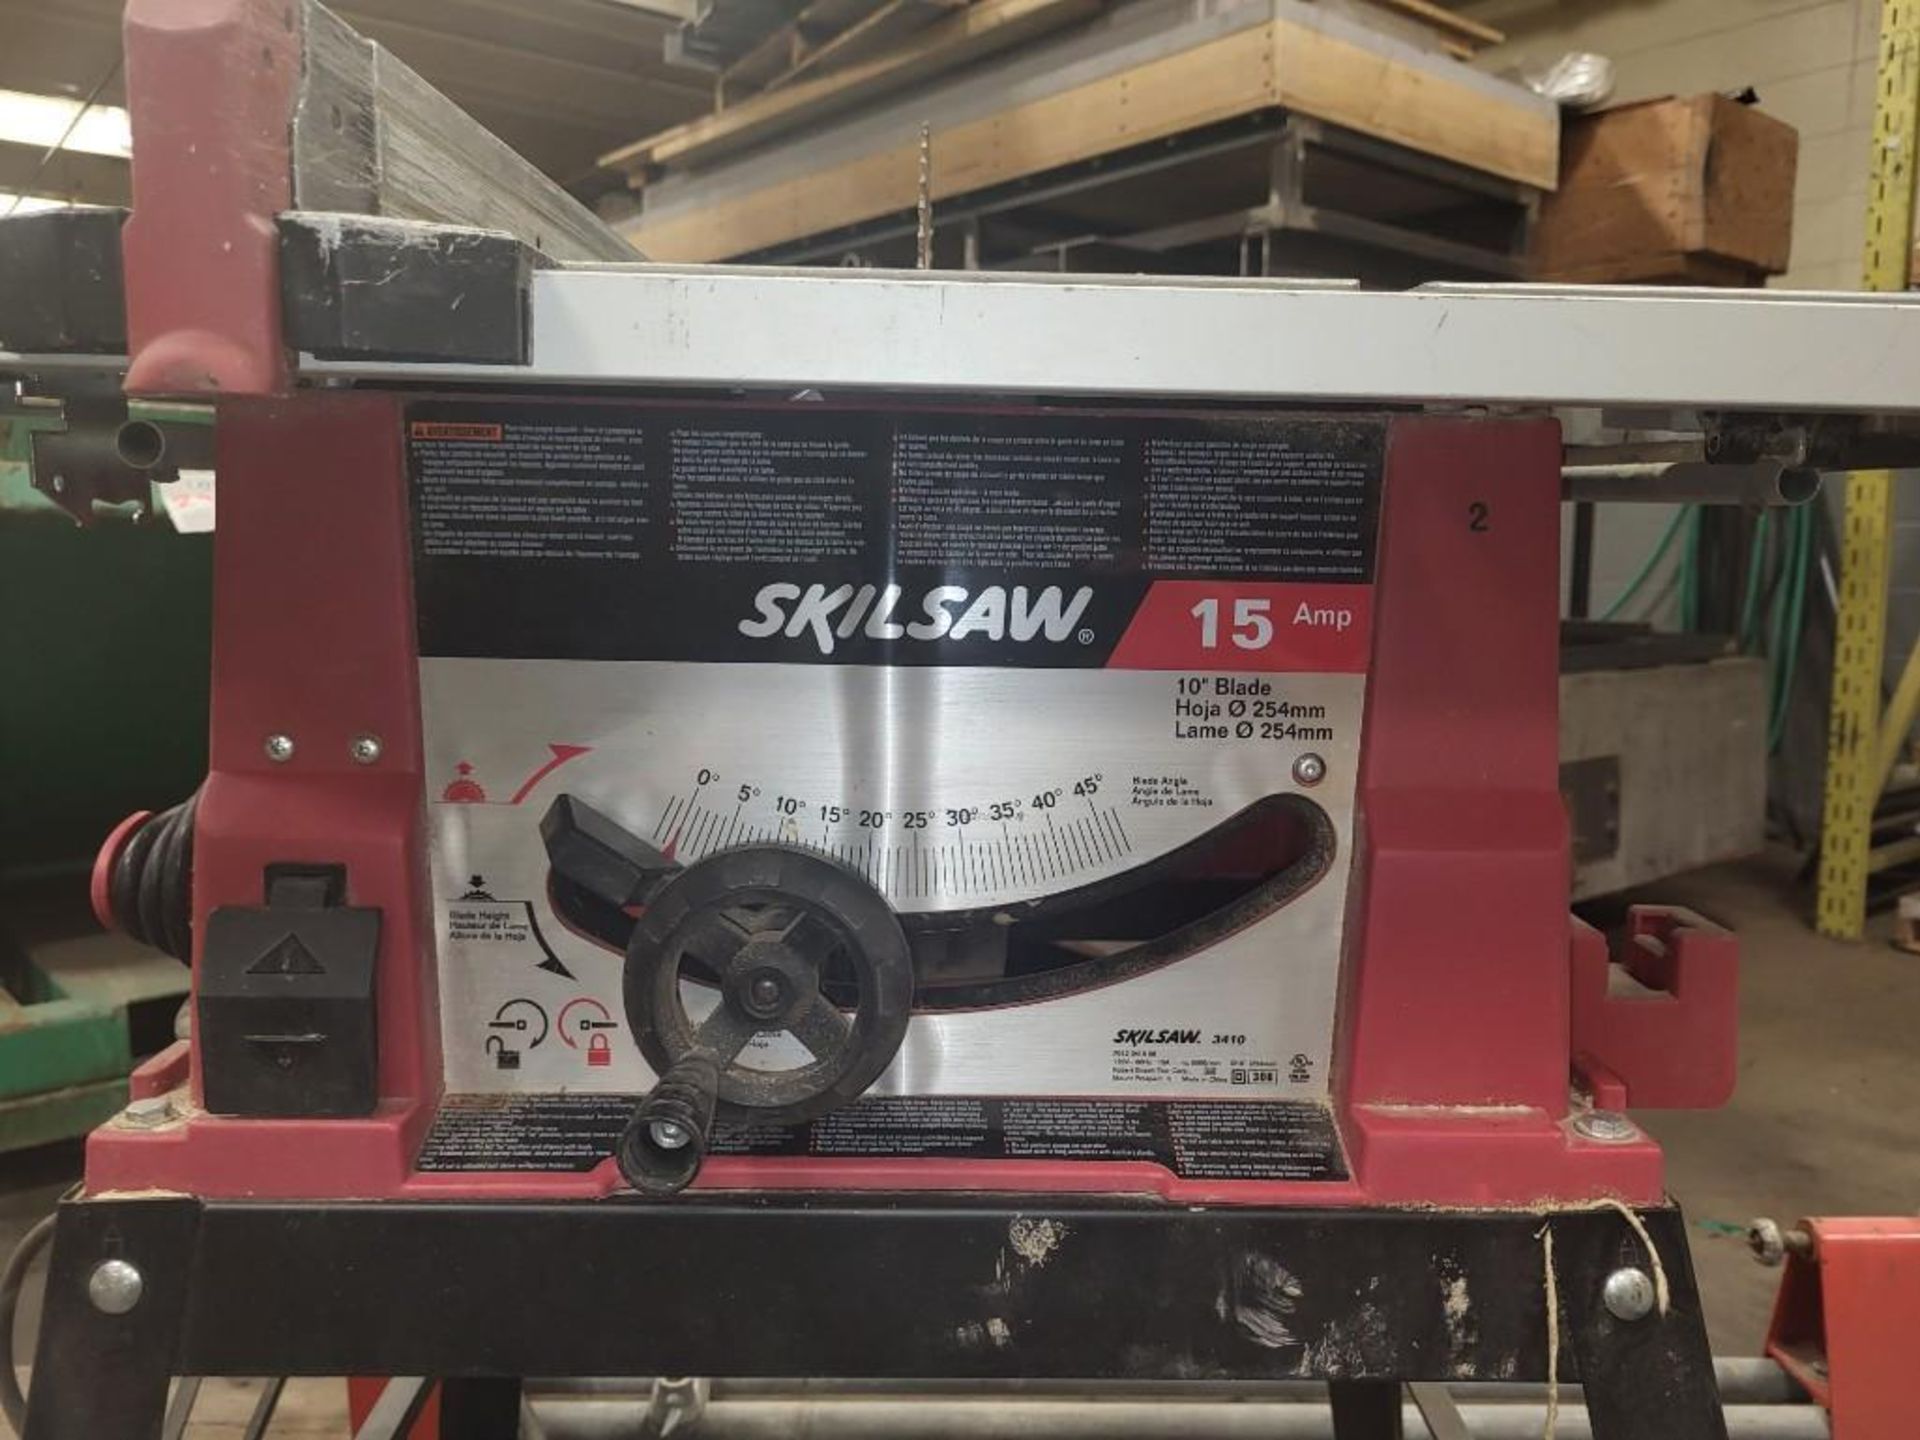 Skilsaw 10" Table Saw With Folding Legs M/N 3410 - Image 2 of 5